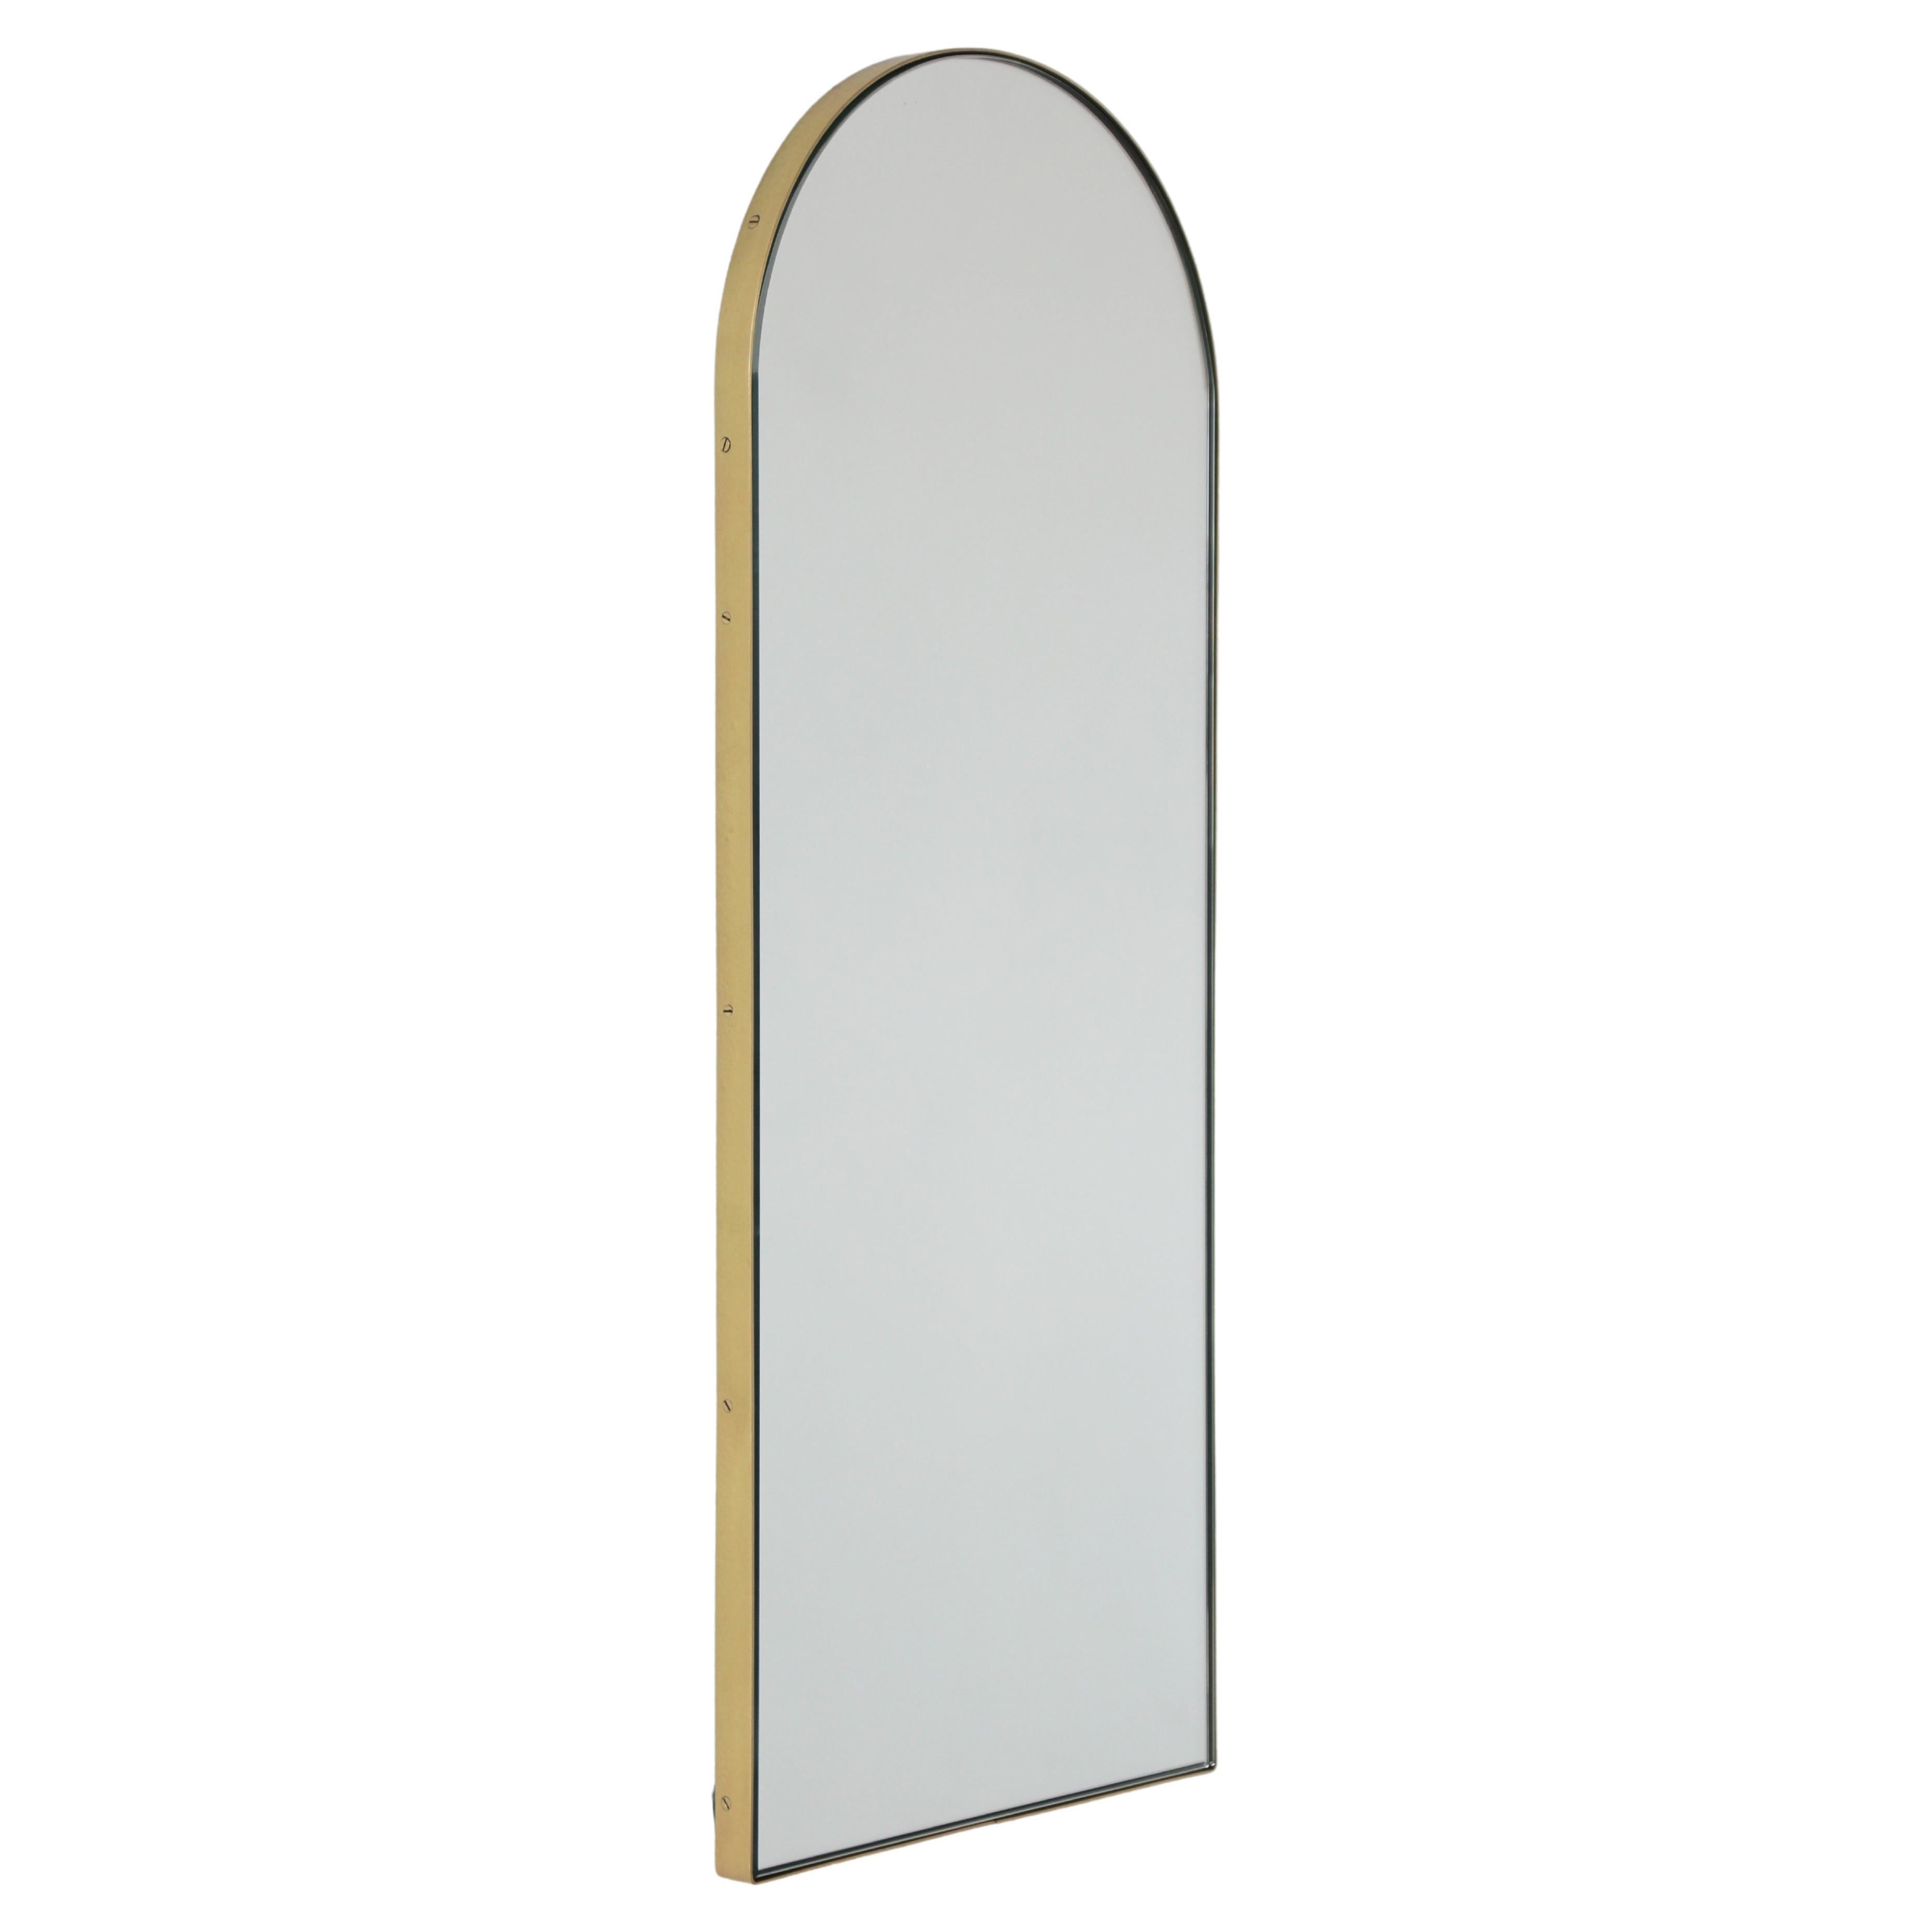 Arcus Arch shaped Art Deco Elegance Mirror with Brass Frame, Small im Angebot